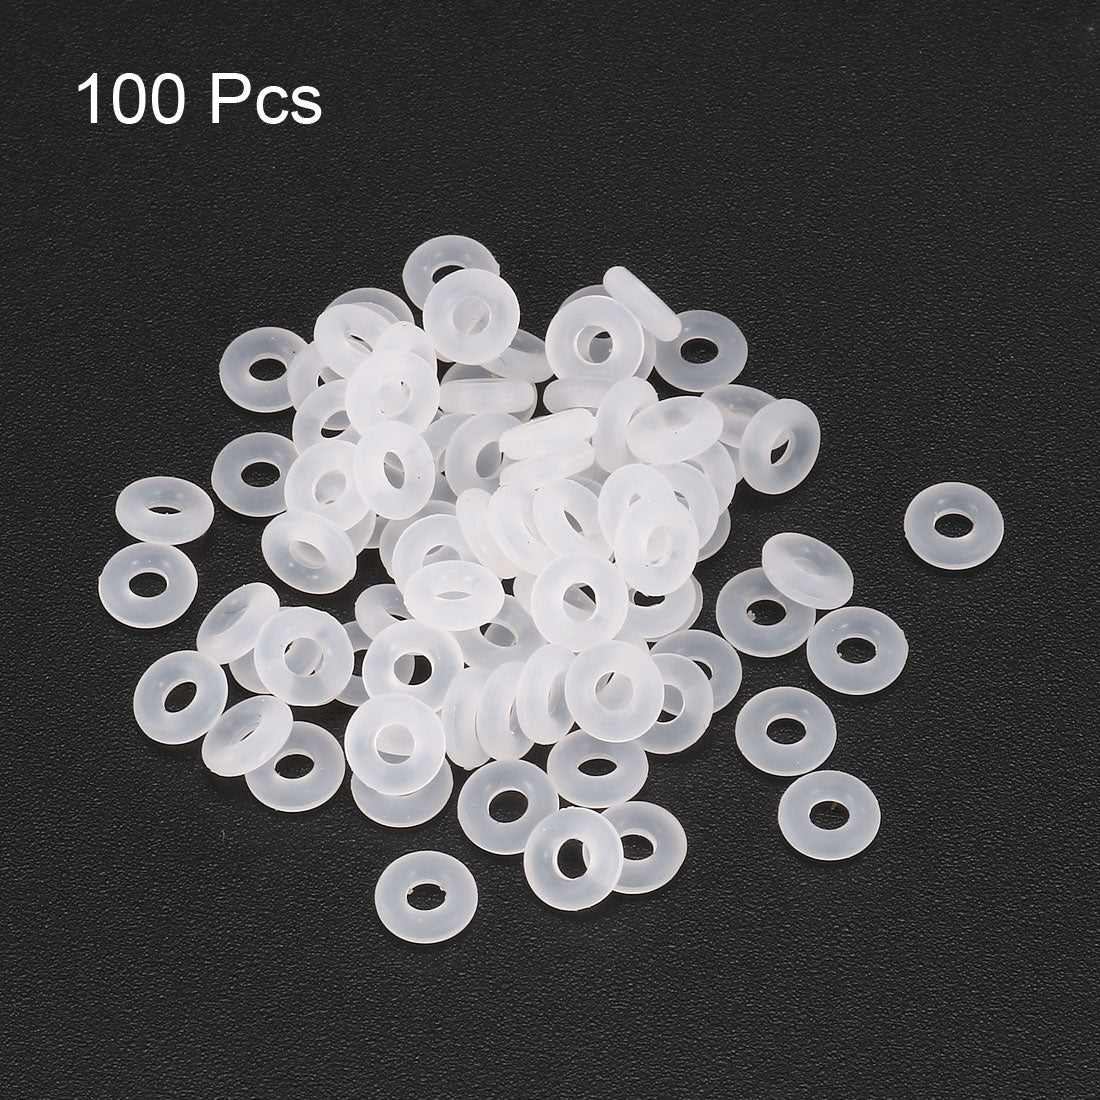 uxcell Uxcell 100Pcs White 8mm x 1.5mm Silicone Rubber Gasket O Ring Sealing Ring